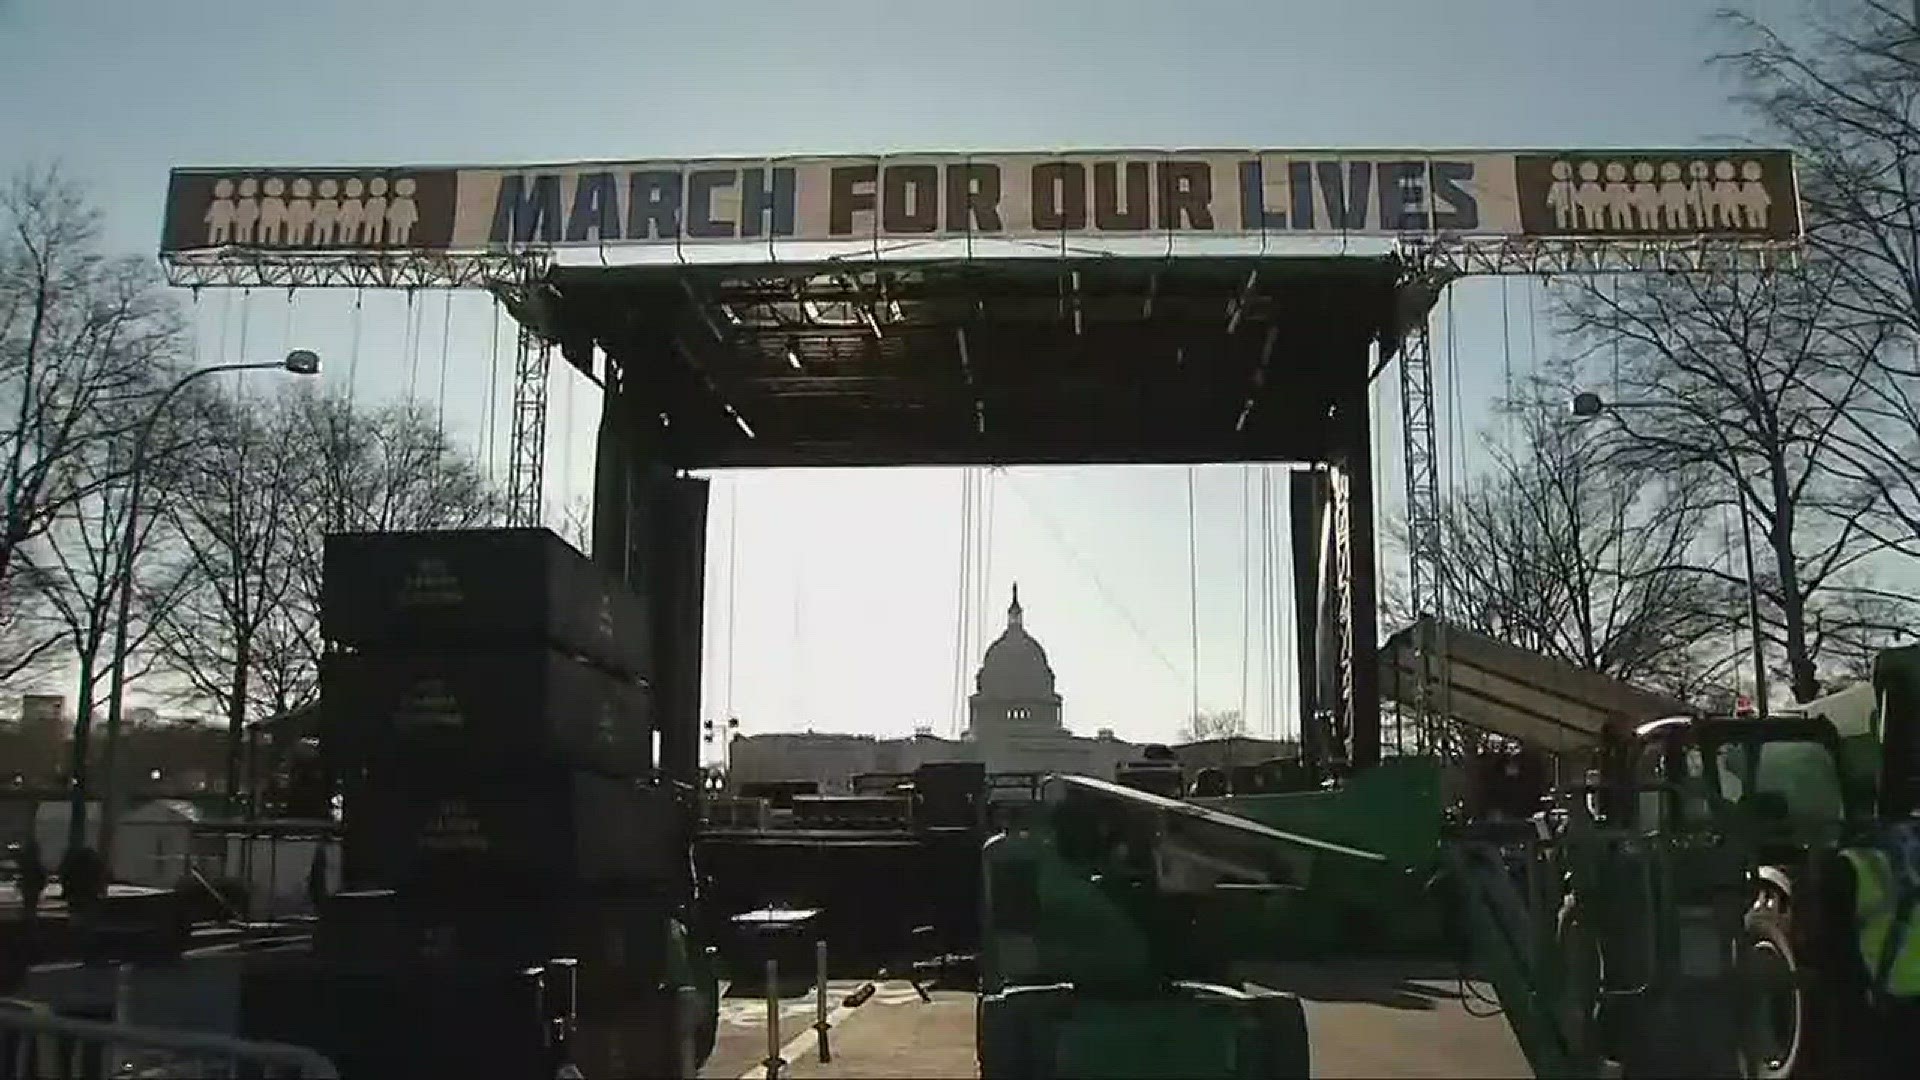 More than 500,000 expected for March For Our Lives rally in Washington D.C.